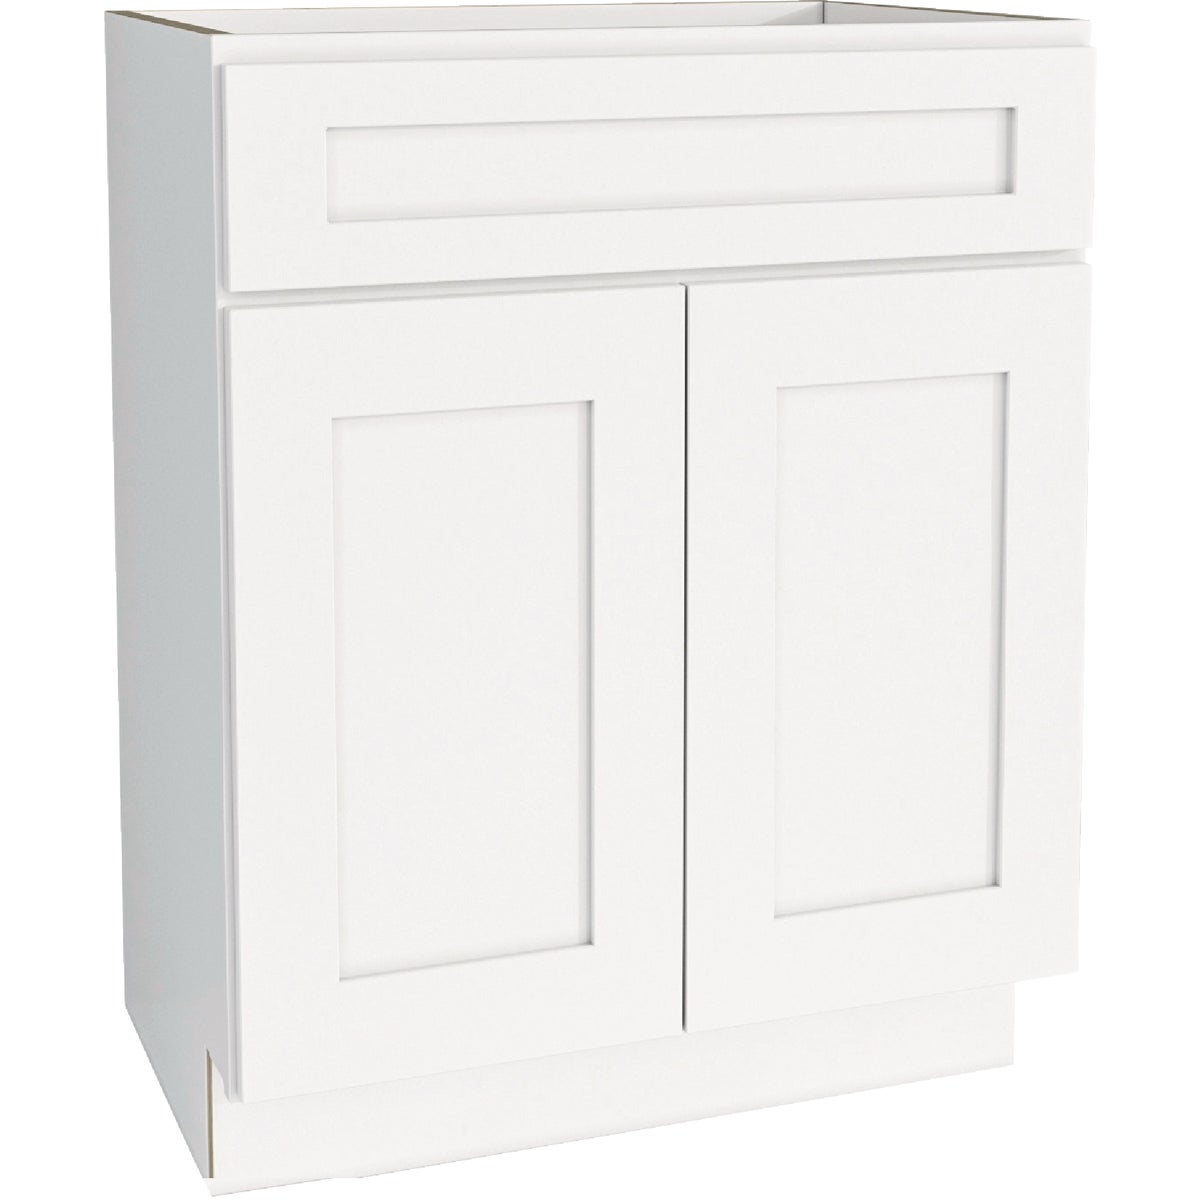 CraftMark Plymouth Shaker 24 In. W x 24 In. D x 34.5 In. H Ready To Assemble White Base Kitchen Cabinet